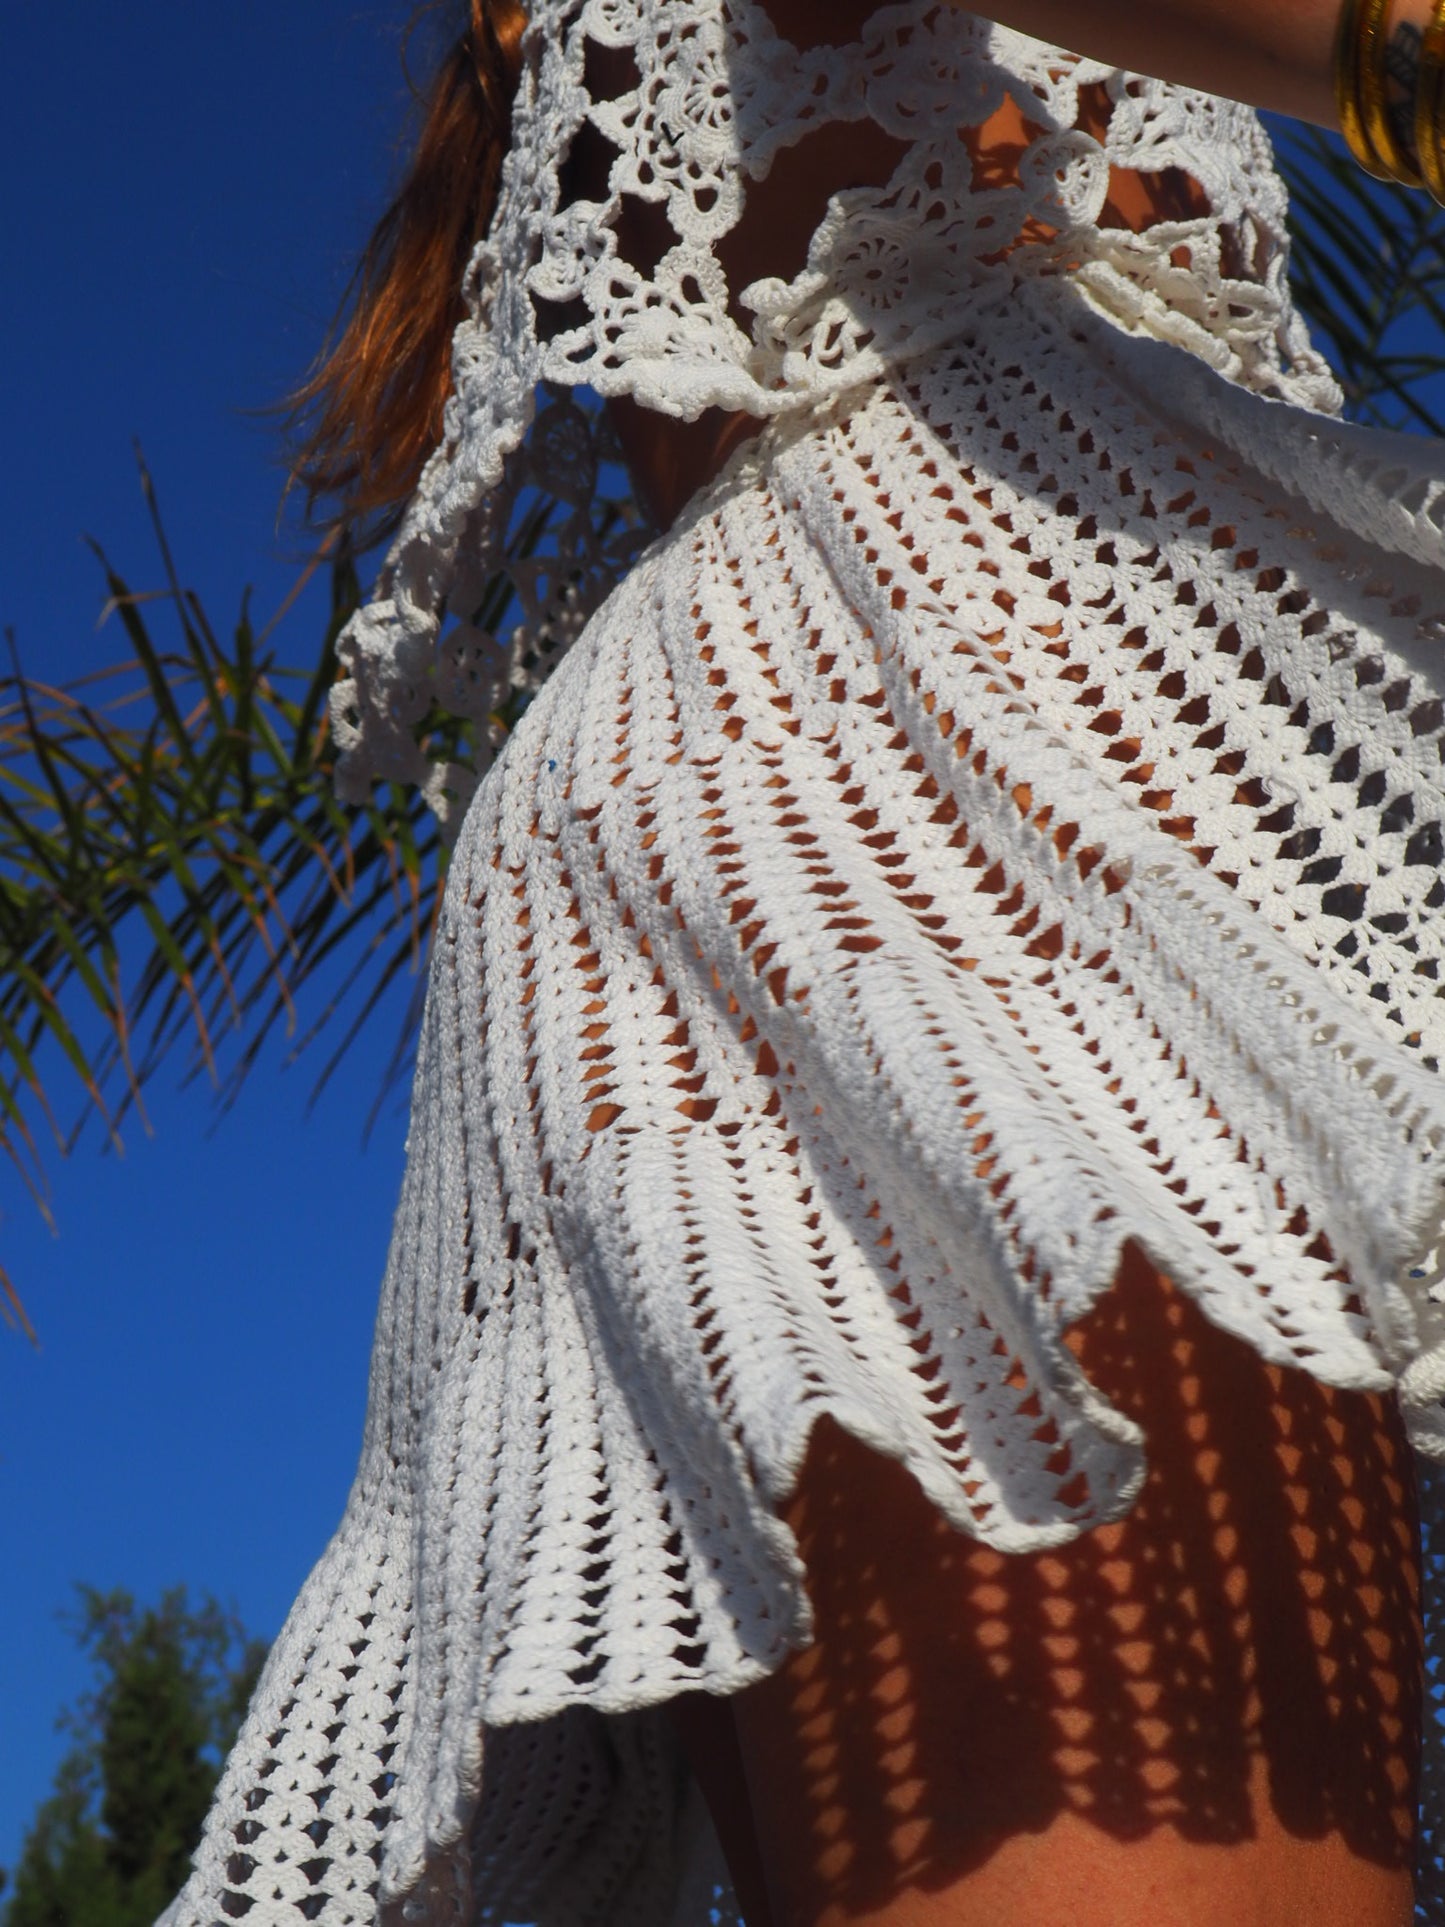 Antique white lace crochet textiles skirt up-cycled by Vagabond Ibiza